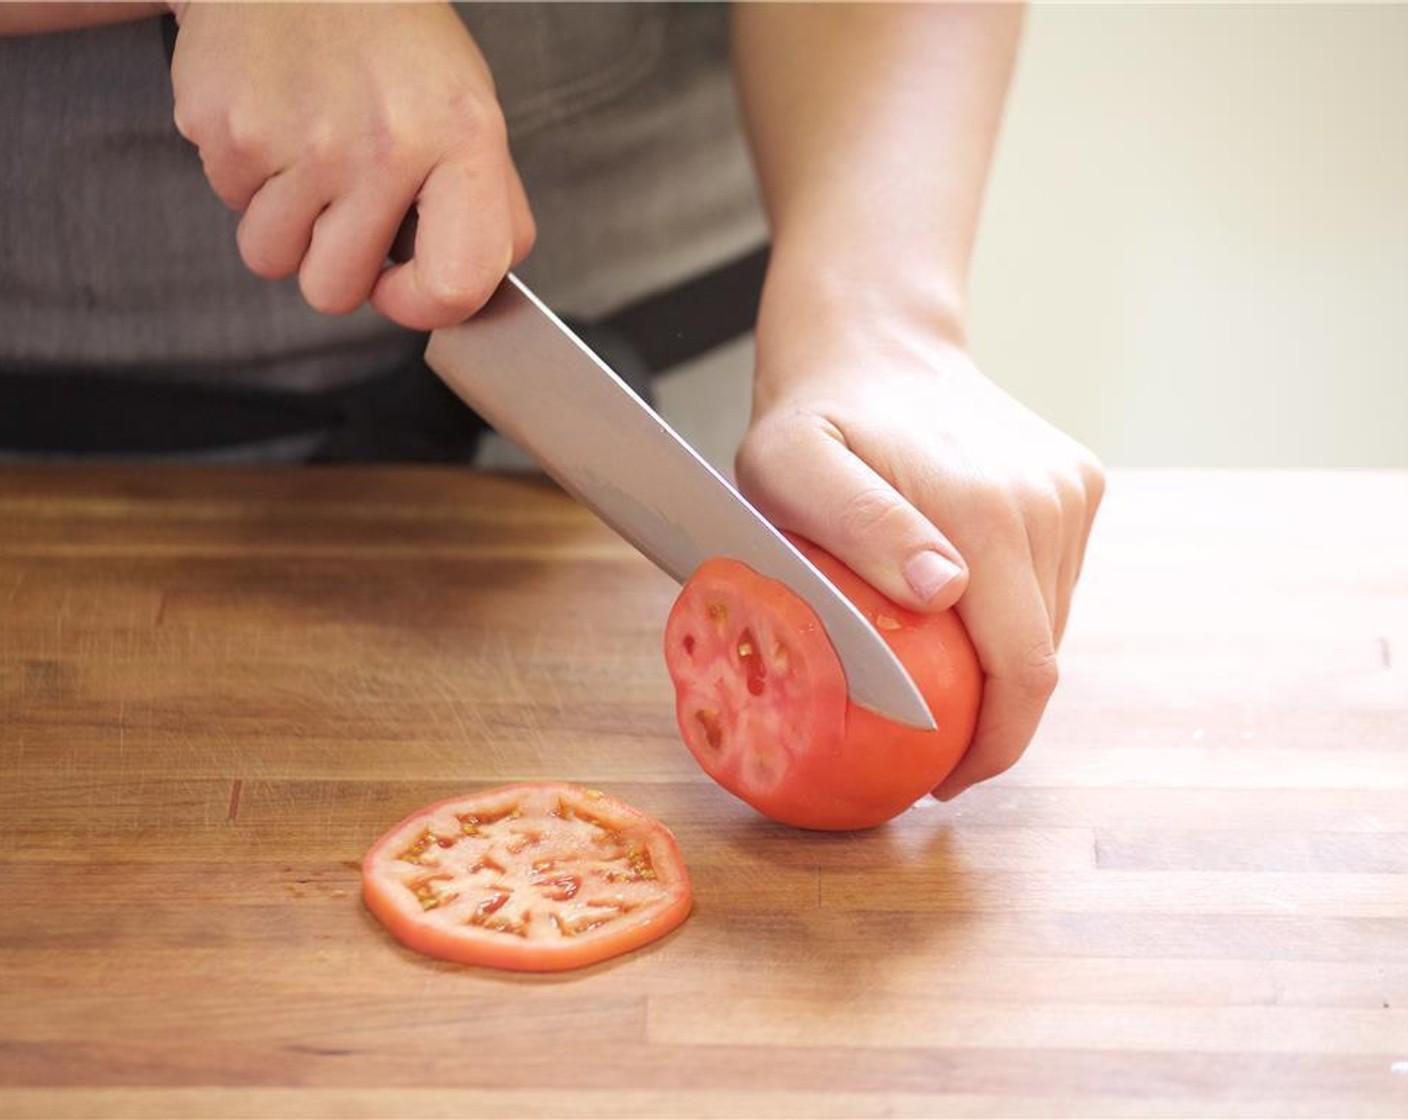 step 1 Preheat grill to medium-high heat. Slice Tomato (1) into half-inch sliced rounds and set aside. Peel and cut Red Onion (1/2) into quarter-inch sliced rounds and set aside. Slice Romaine Lettuce (2 pieces) in half widthwise and set aside.